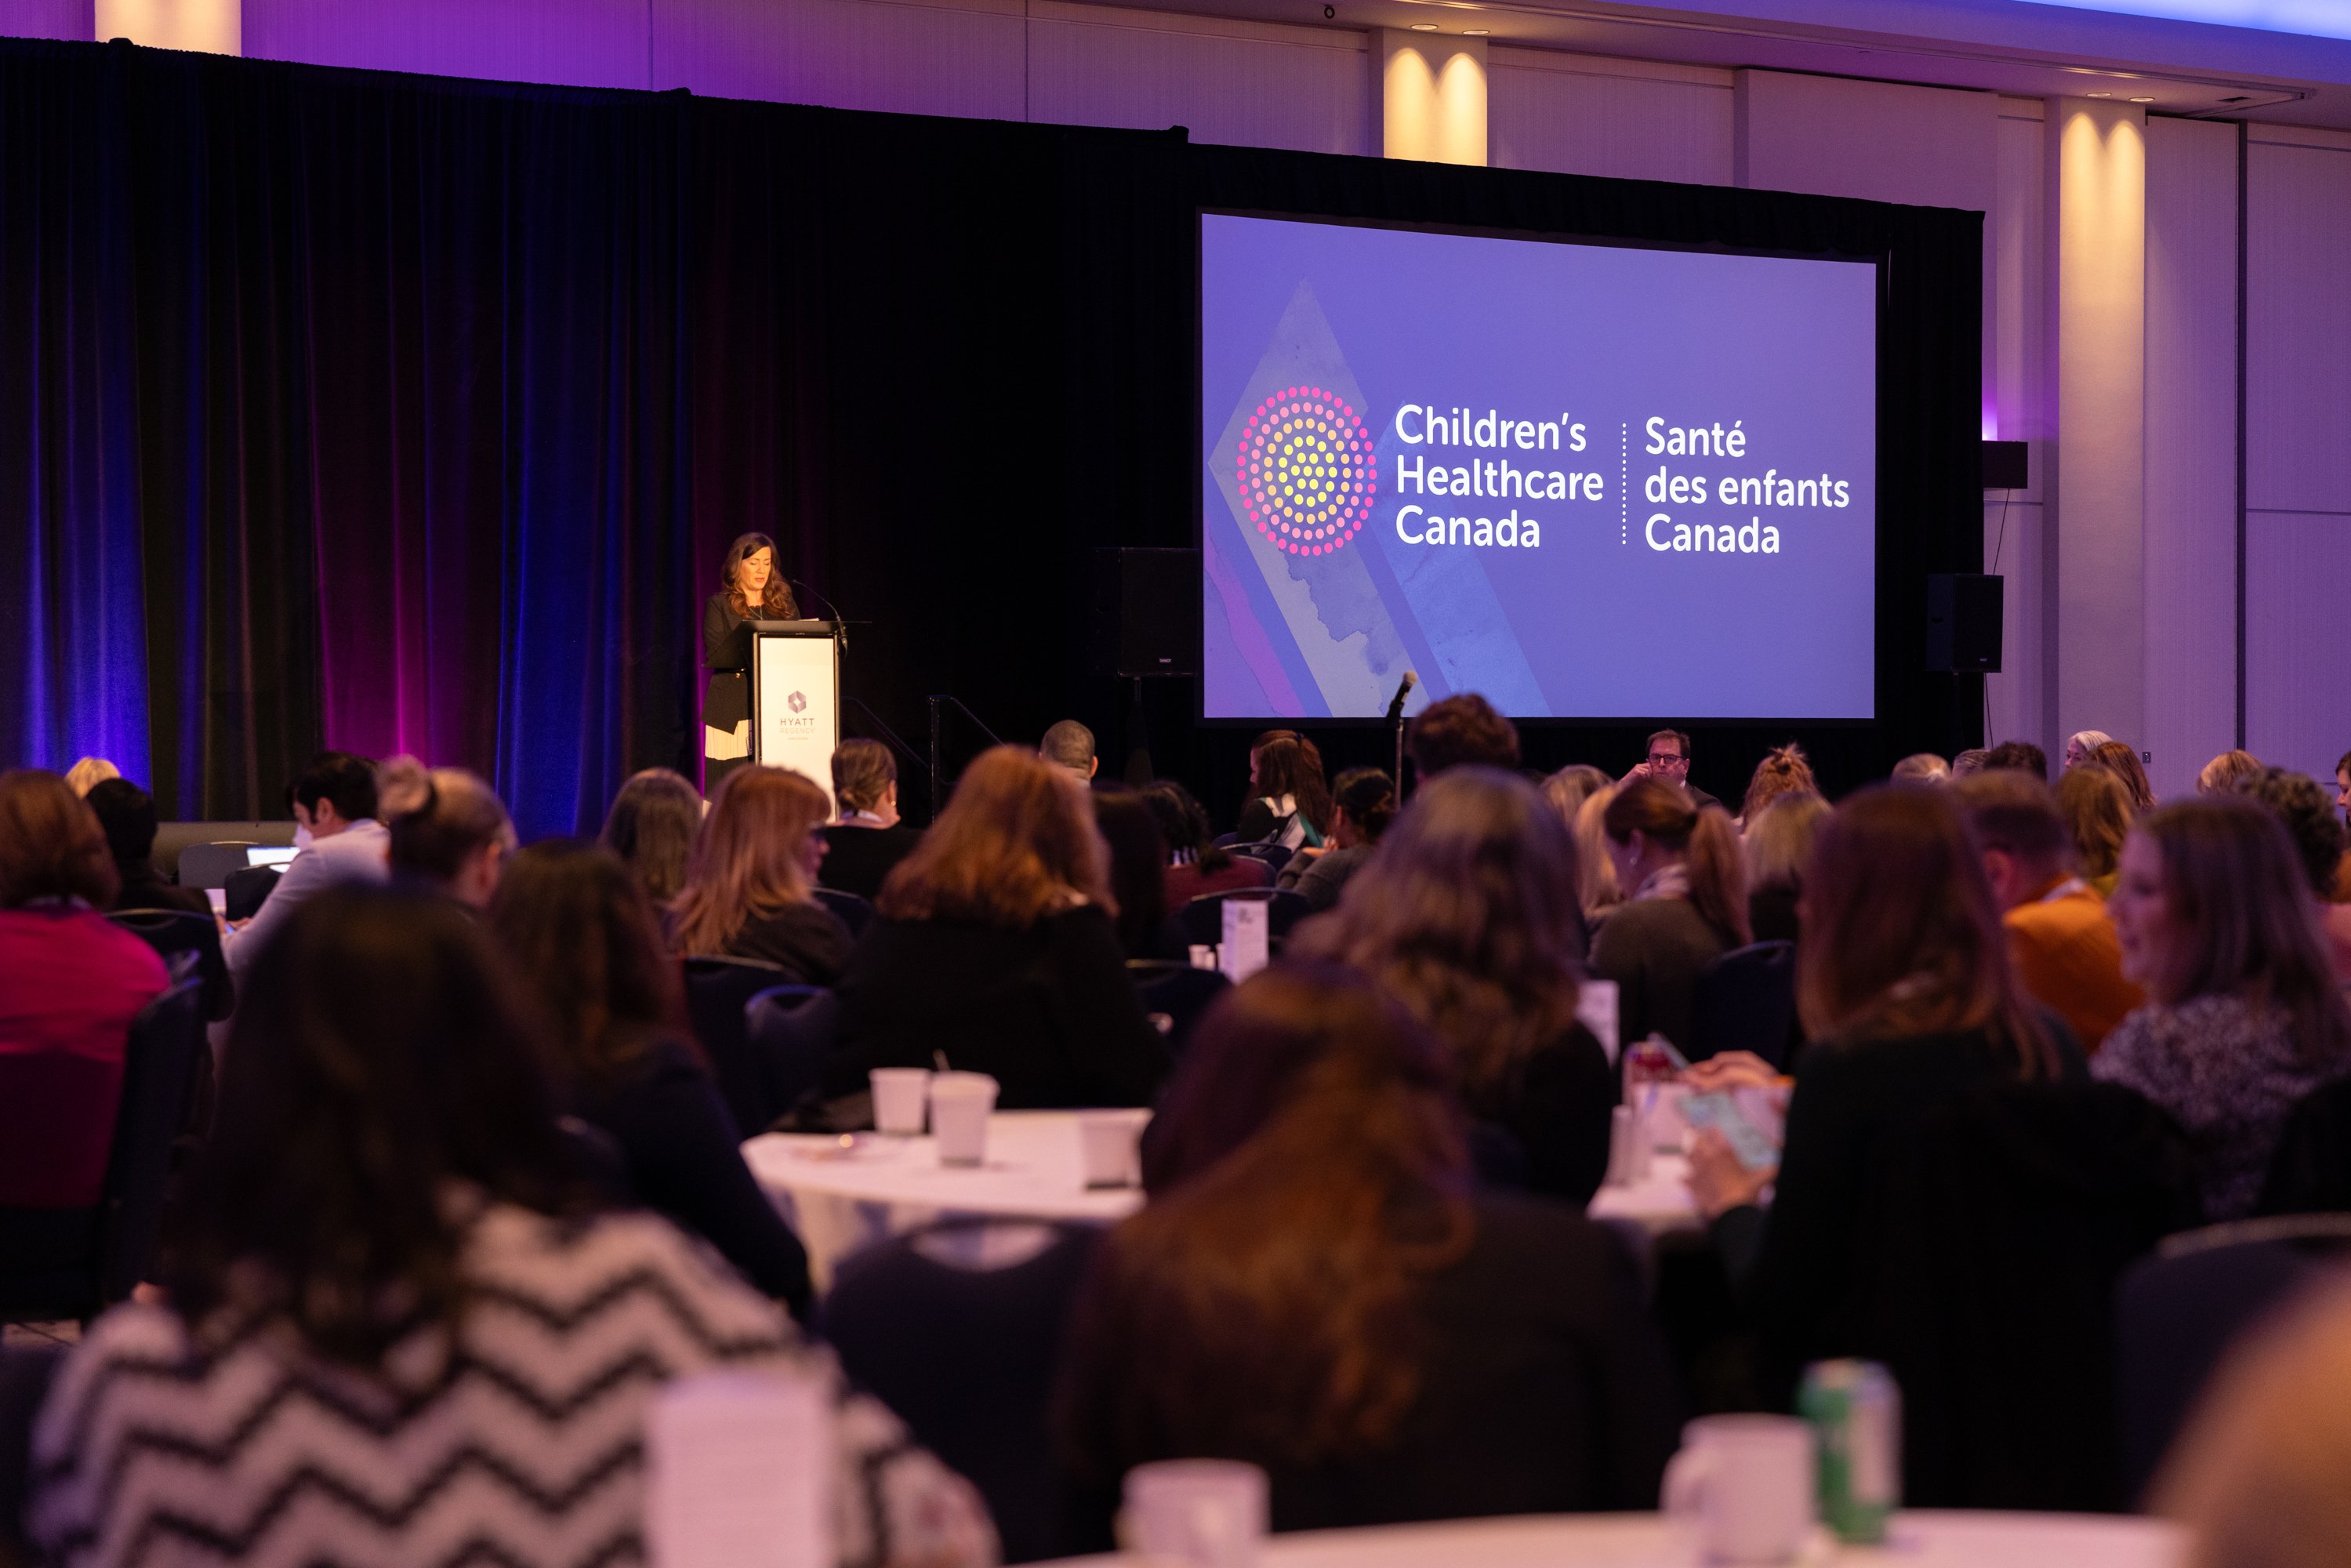 A photo of a speaker at a podium speaking to an audience. A large display screen is next to the speaker displaying the Children's Healthcare Canada logo. 